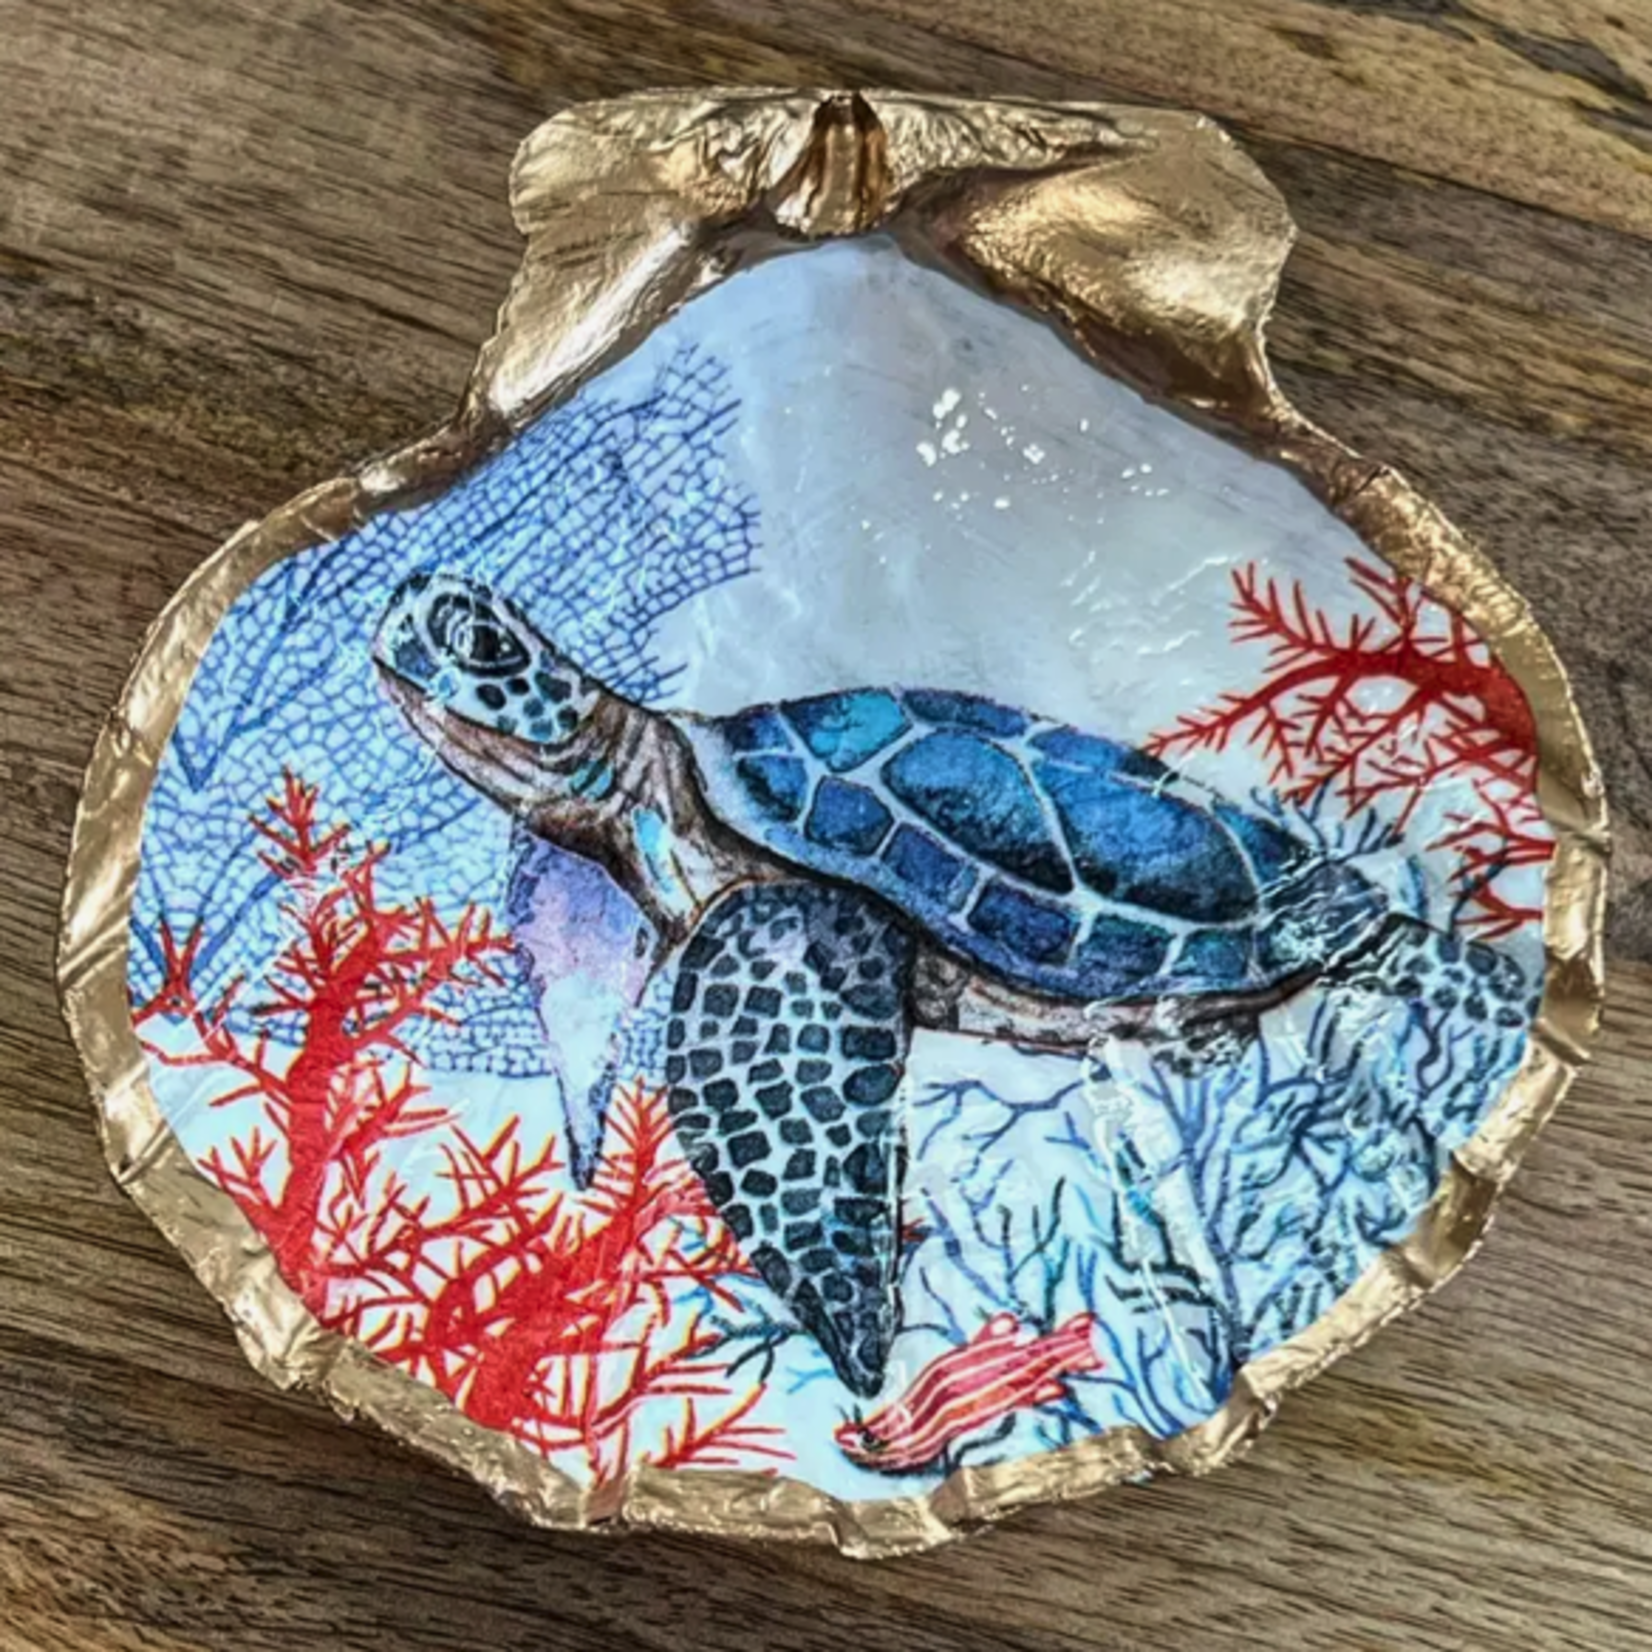 Outside The Box 6" Blue Turtle Trinket Hand Painted Shell Decor - EACH SOLD SEPARATELY